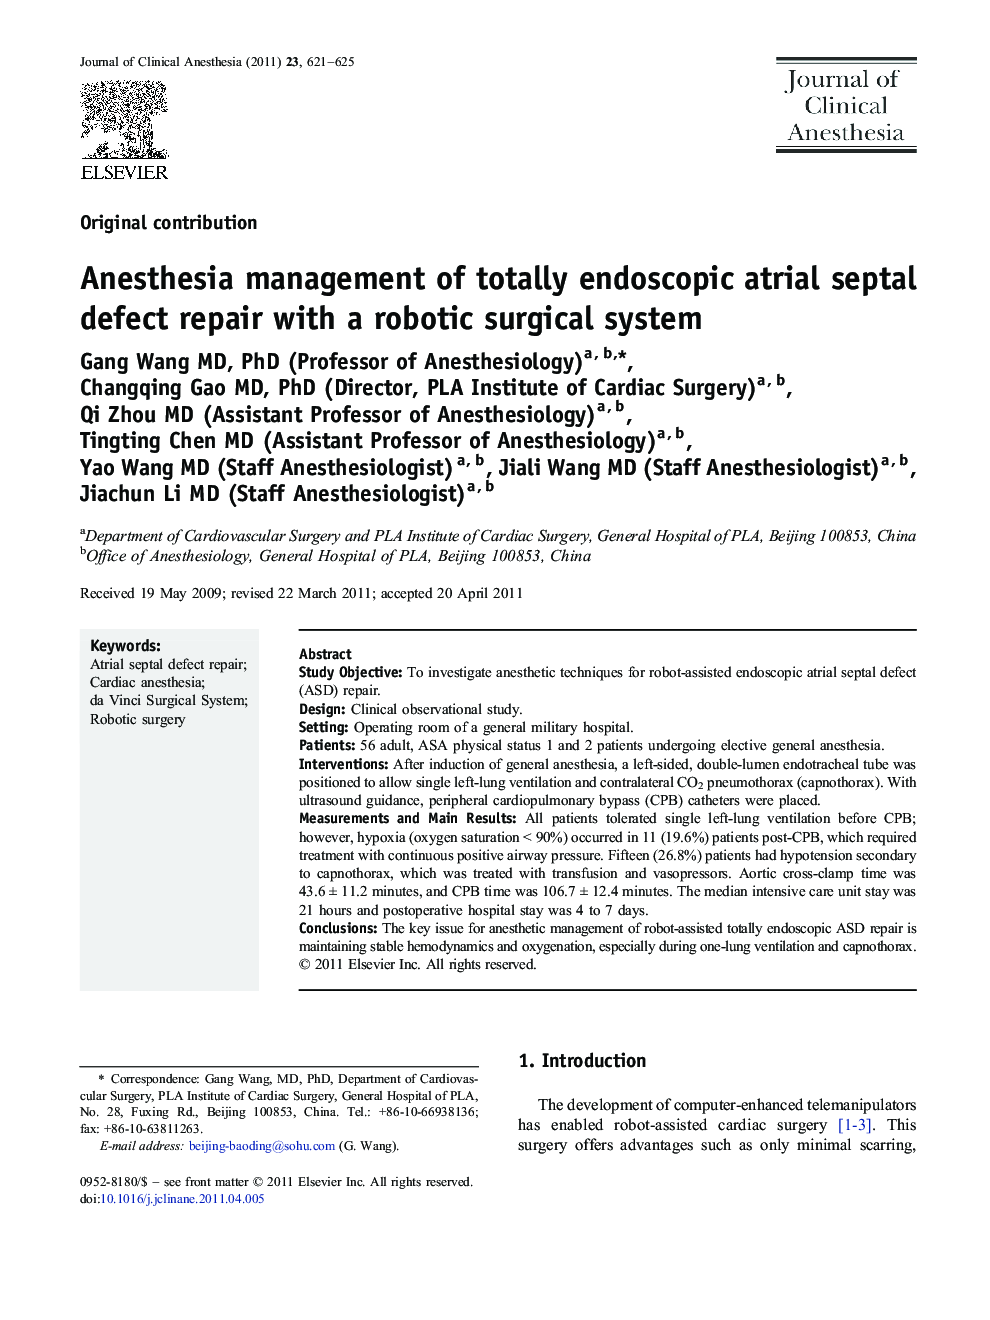 Anesthesia management of totally endoscopic atrial septal defect repair with a robotic surgical system